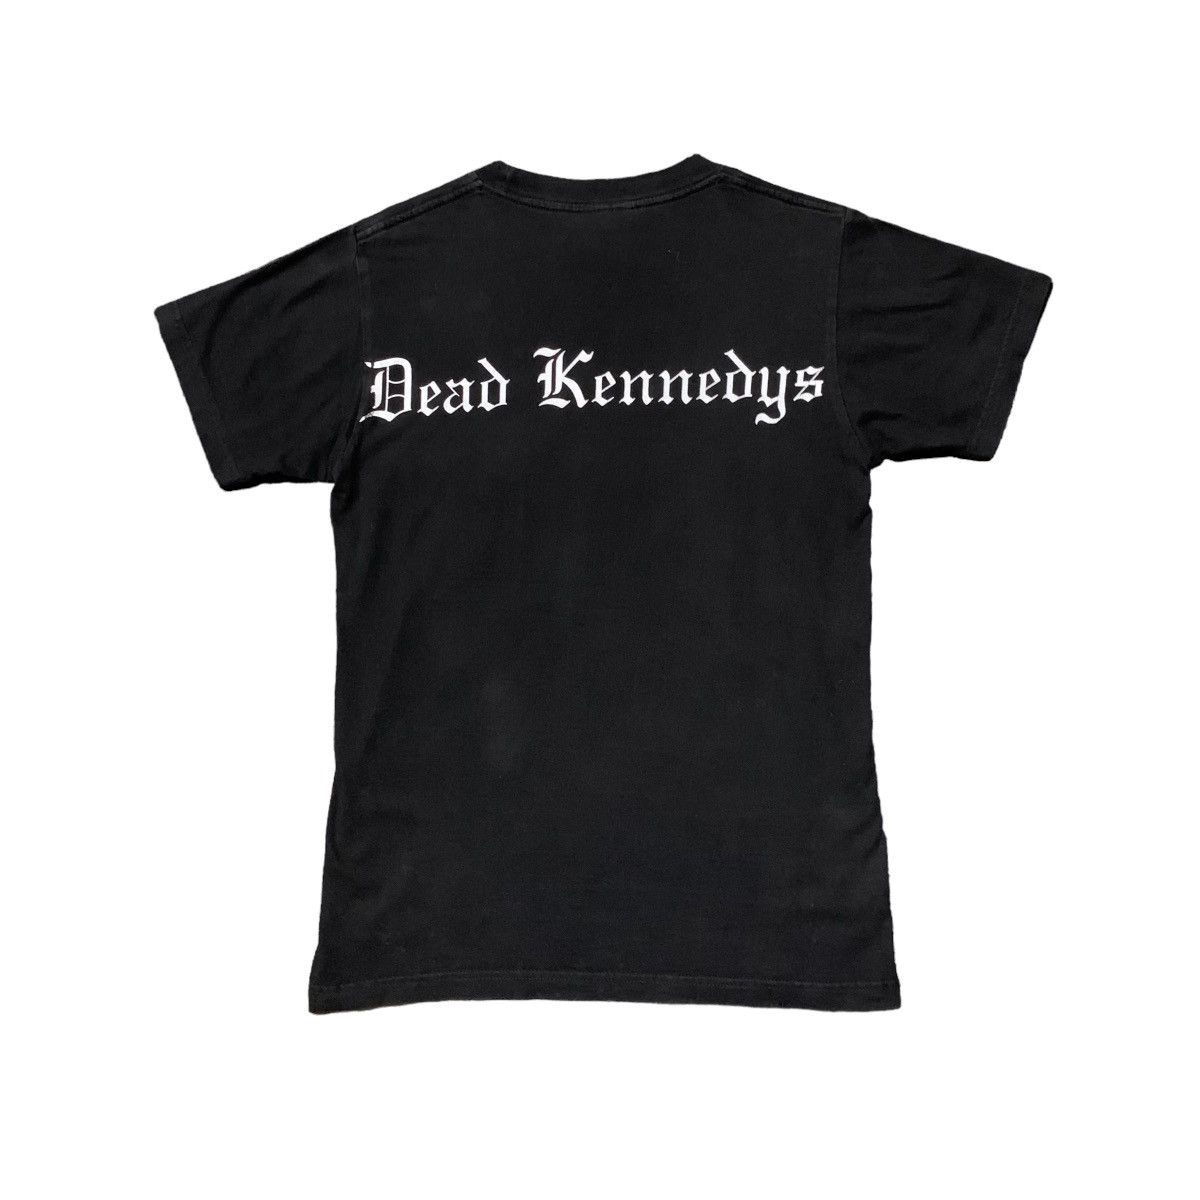 Dead Kennedys ✨Y2K “ADULT” DEAD KENNEDYS PUNK ROCK BAND TEES Size US S / EU 44-46 / 1 - 2 Preview